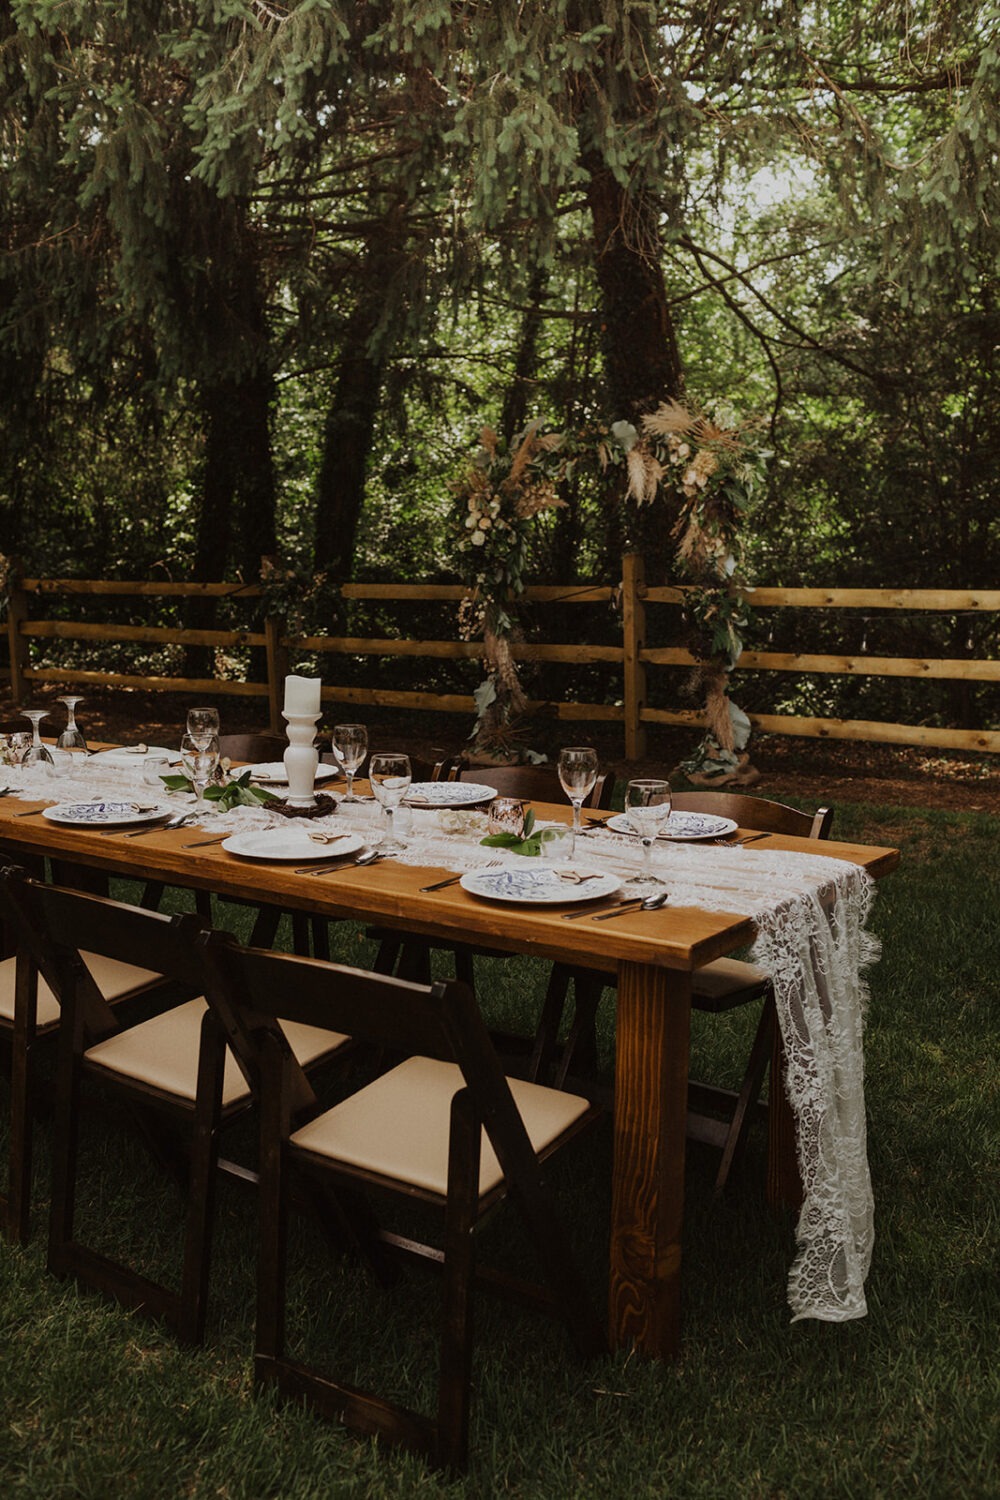 floral and lace table setting at backyard wedding